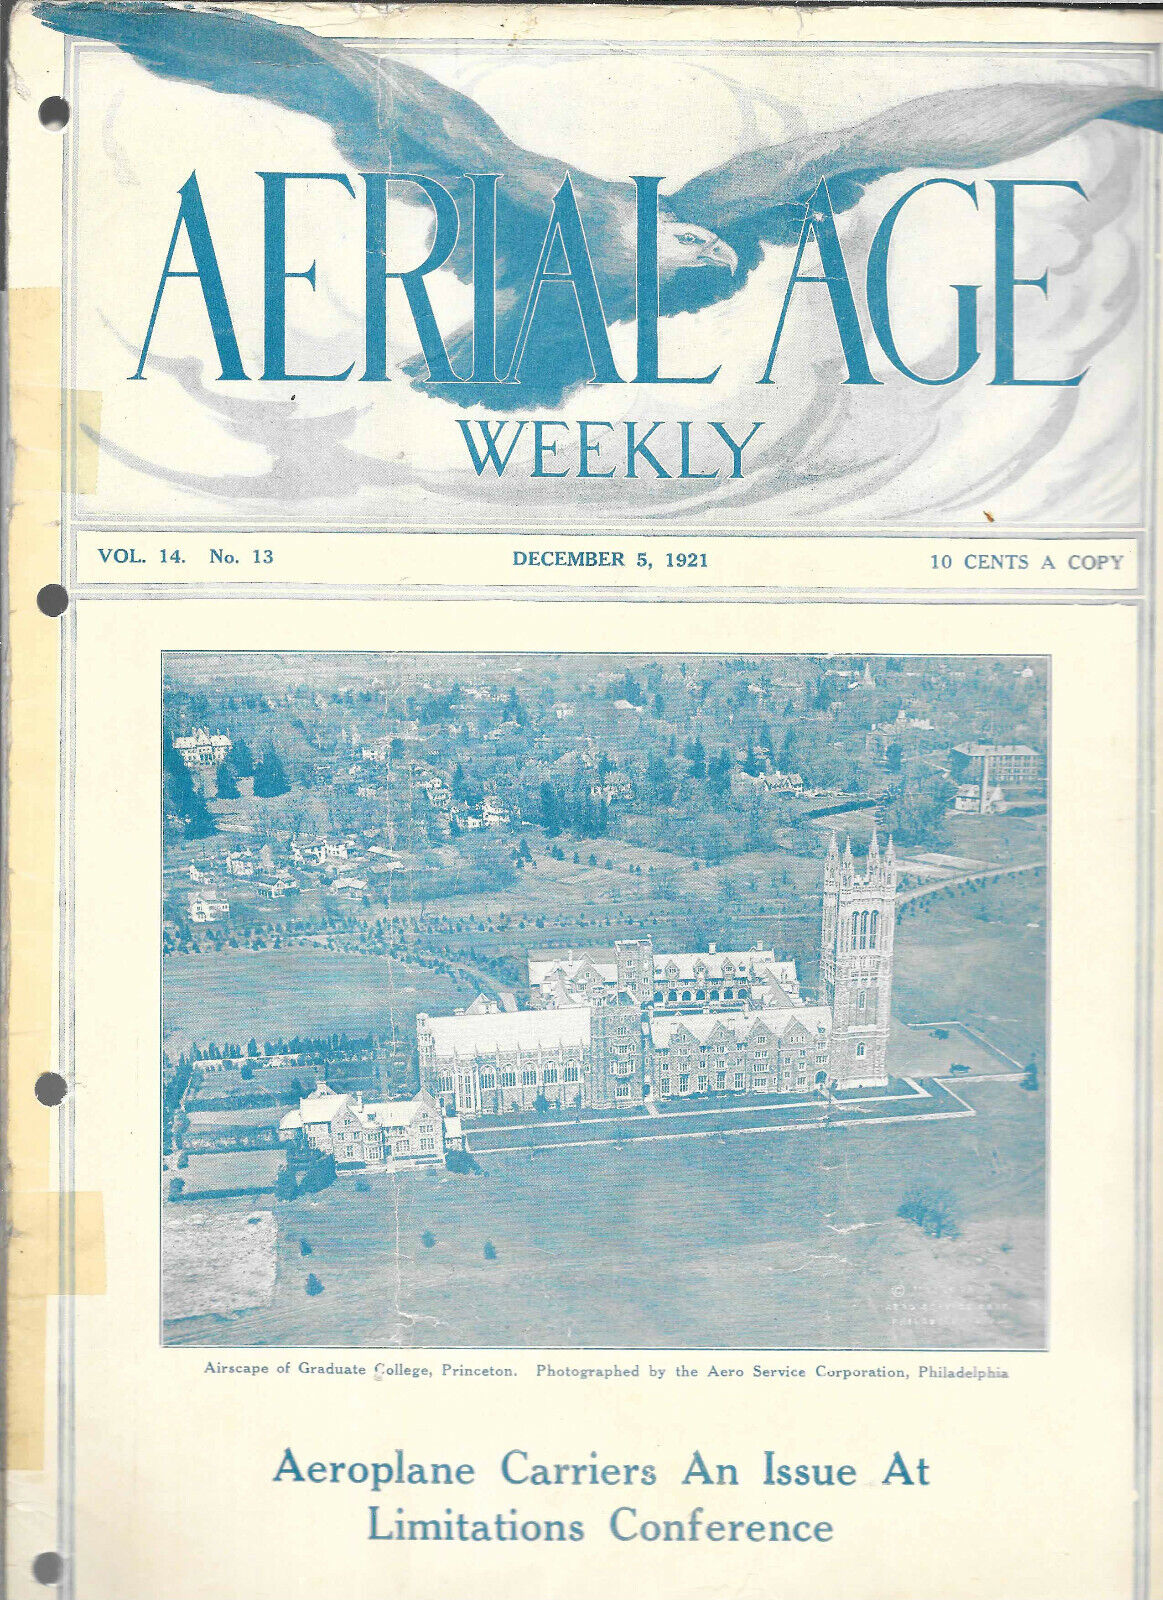 MAGAZINE AERIAL AGE WEEKLY DECEMBER 5 1921 AEROPLANE CARRIERS 10 CENTS AIRPLANE